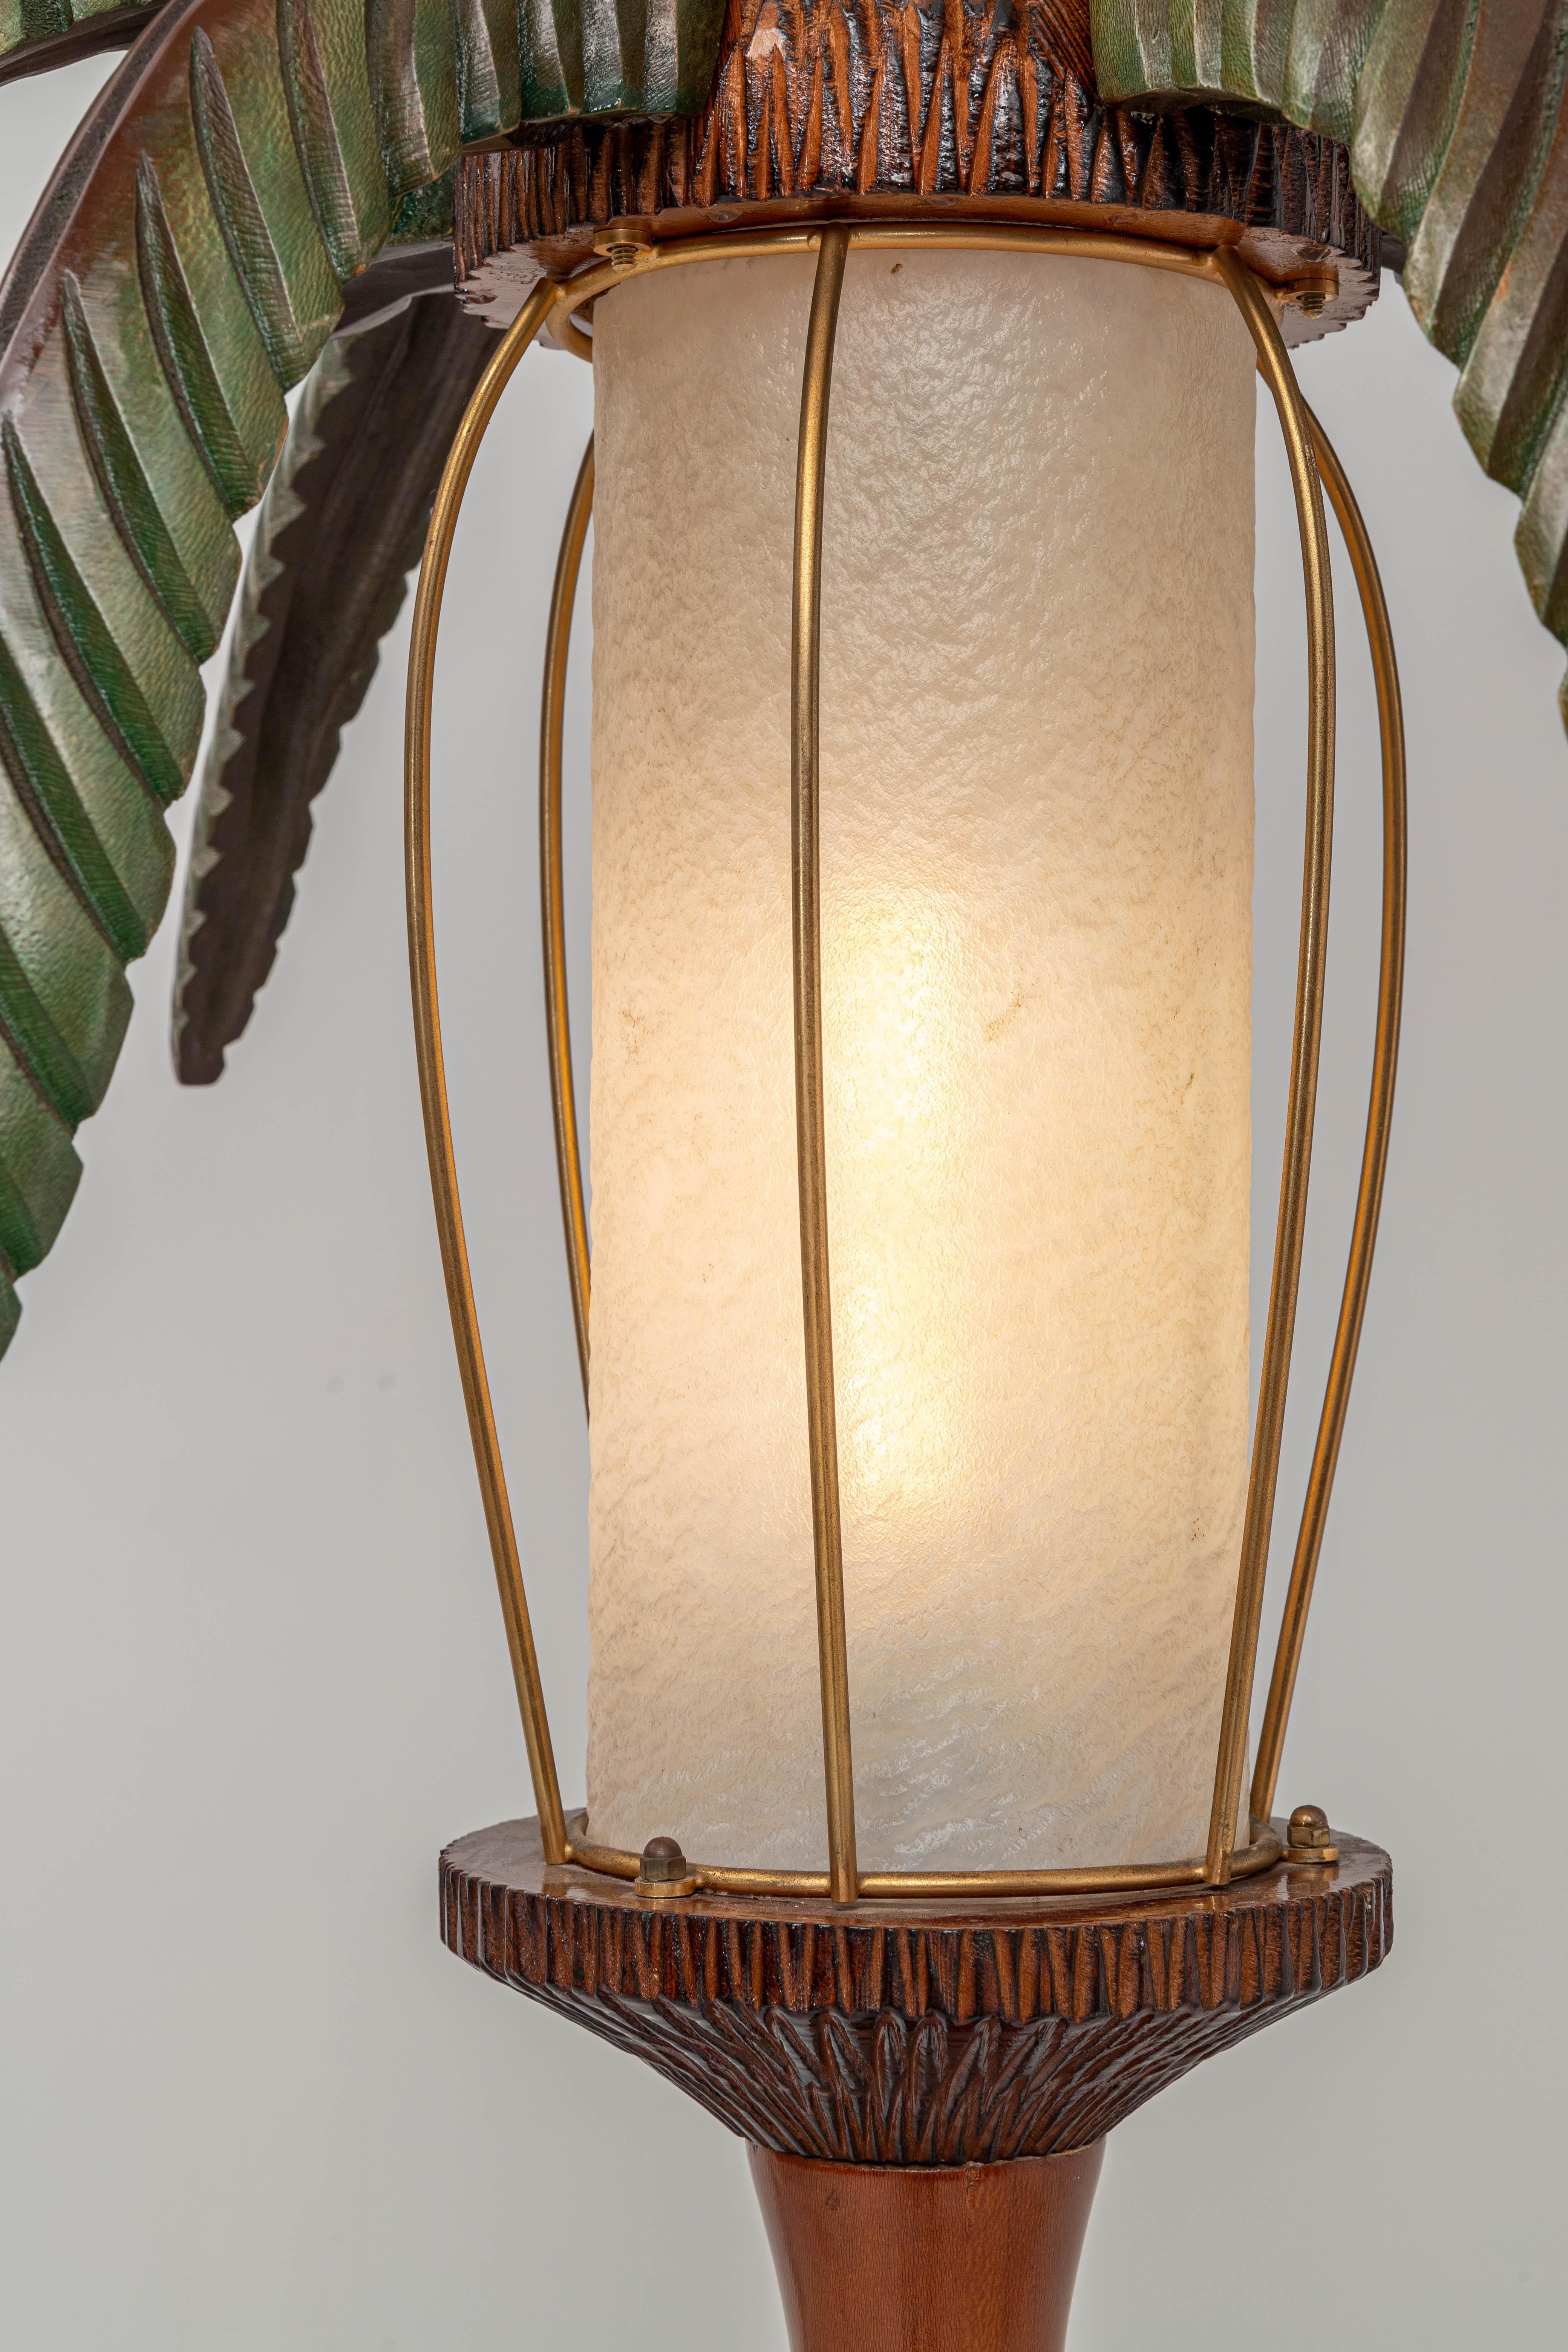 Italian Large Hand-Carved Palm Lamp in Wood and Skin Iso Aldo Tura, Italy, 1970's